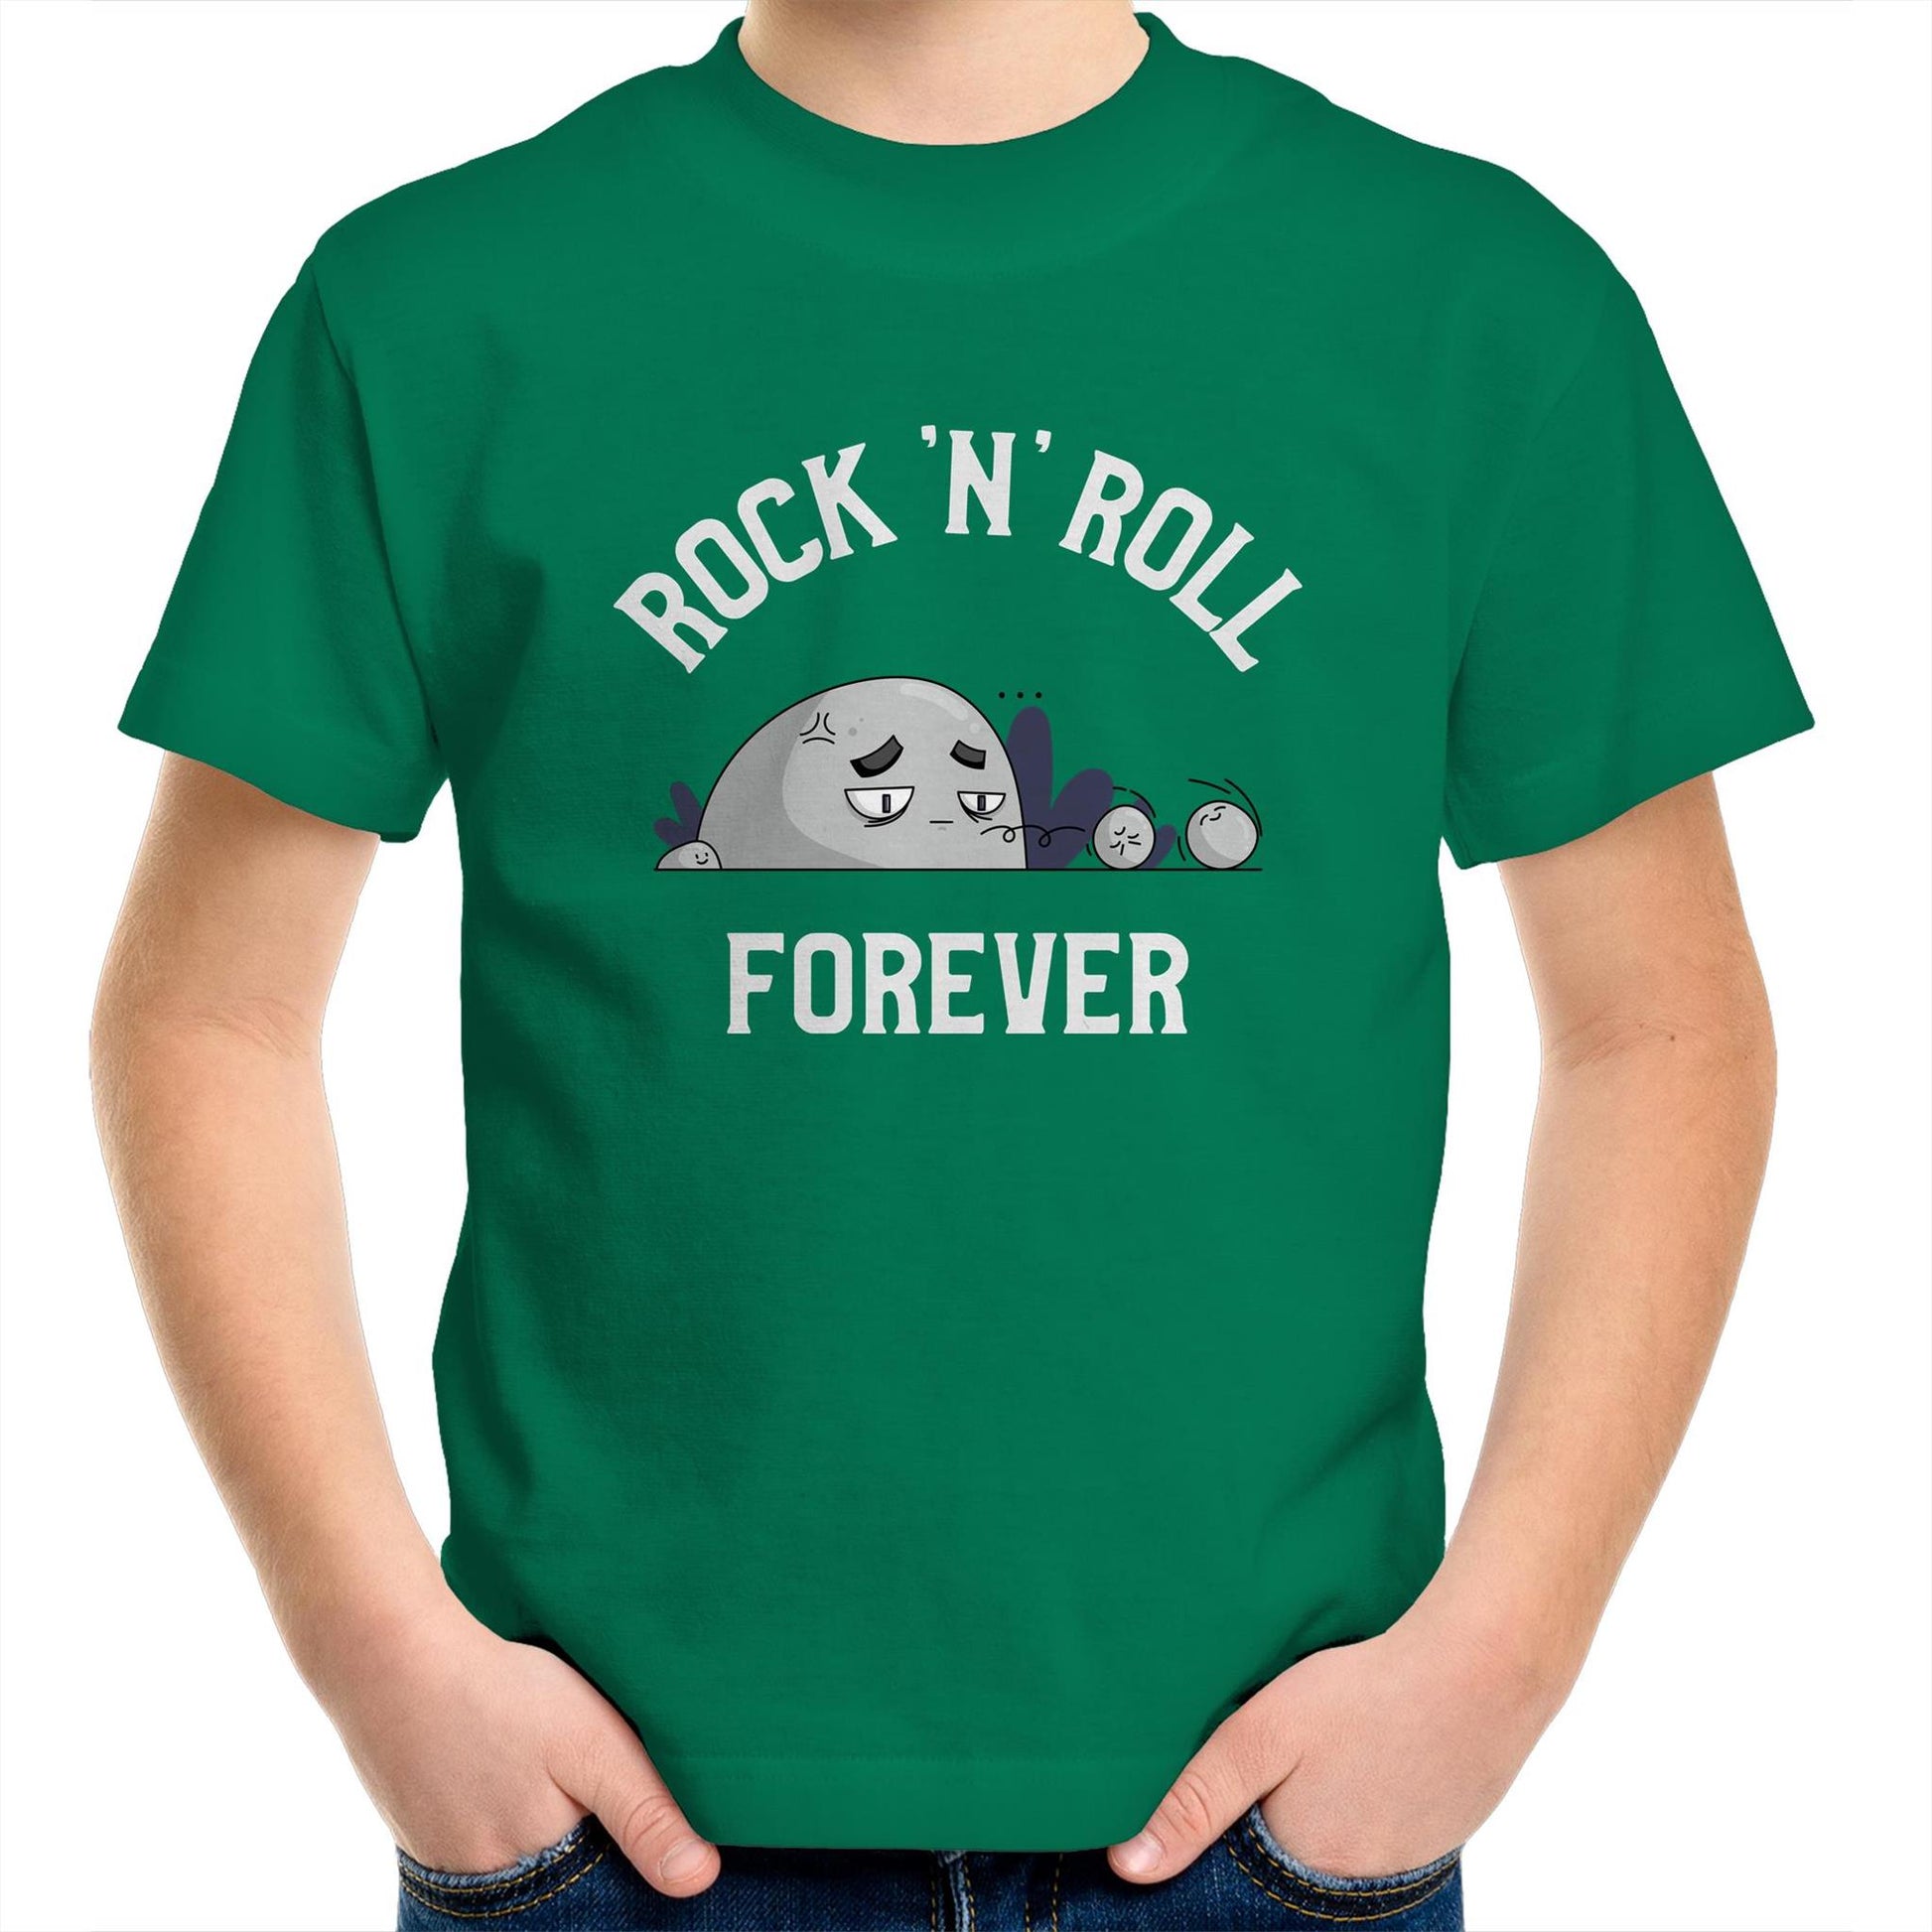 Rock 'N' Roll Forever - Kids Youth T-Shirt Kelly Green Kids Youth T-shirt Music